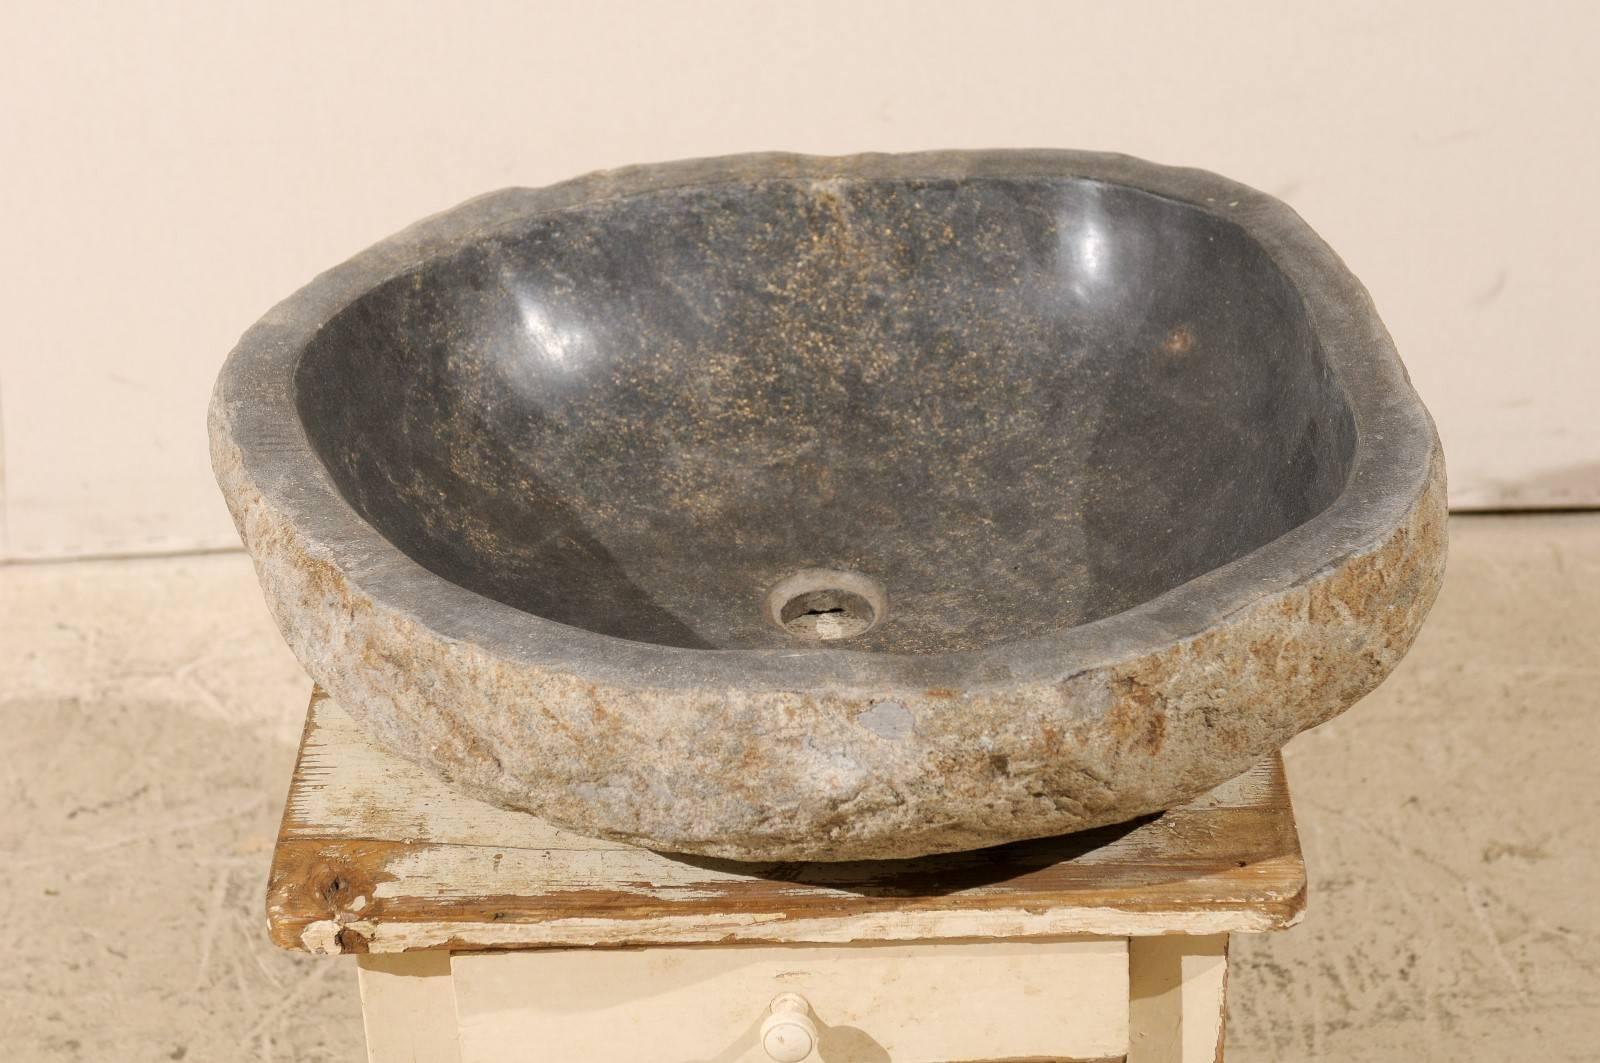 Stone Sink Made from a River Rock / Boulder with Polished Black Interior, Tan Exterior